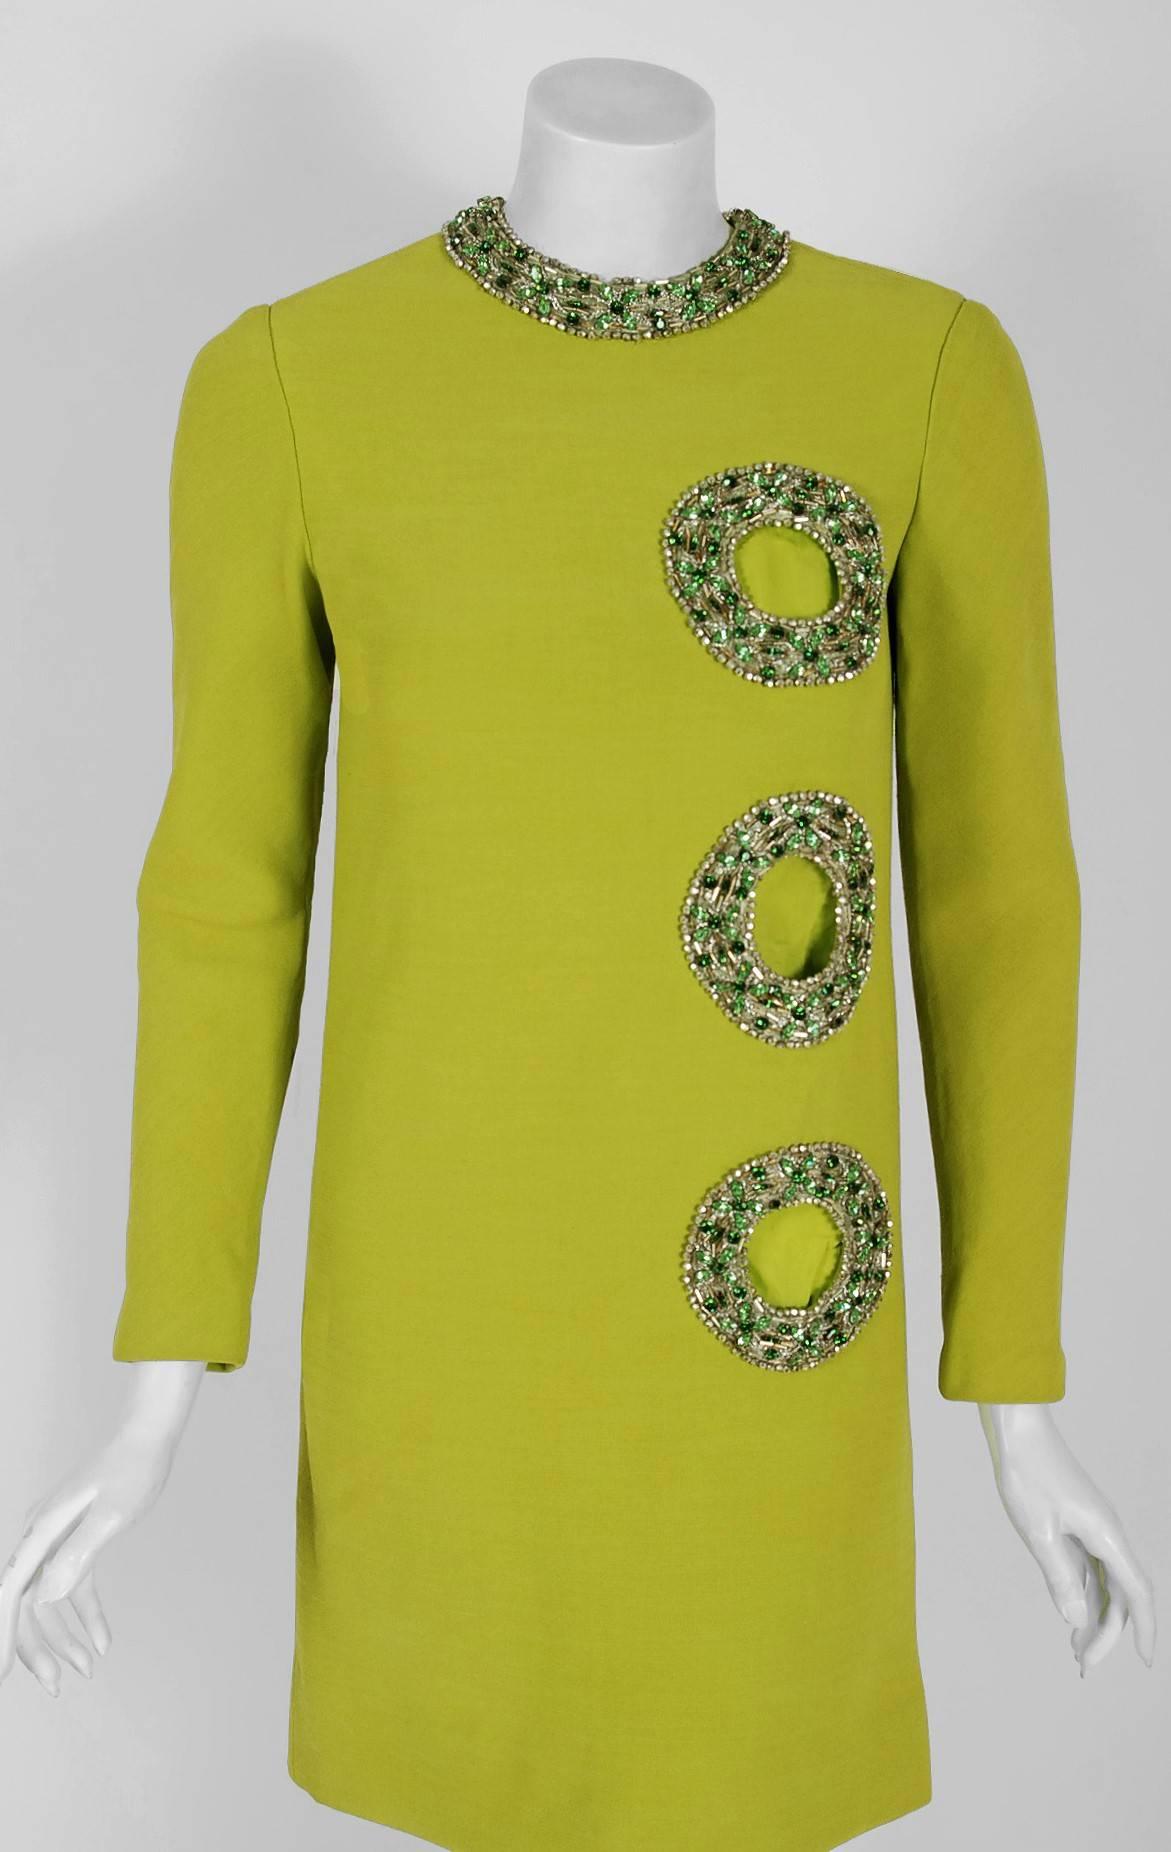 Spectacular 1967 Pierre Cardin designer mod cocktail in the prettiest chartreuse green color! In 1951 Cardin opened his own couture house and by 1957, he started a ready-to-wear line; a bold move for a French couturier at the time. The looks most